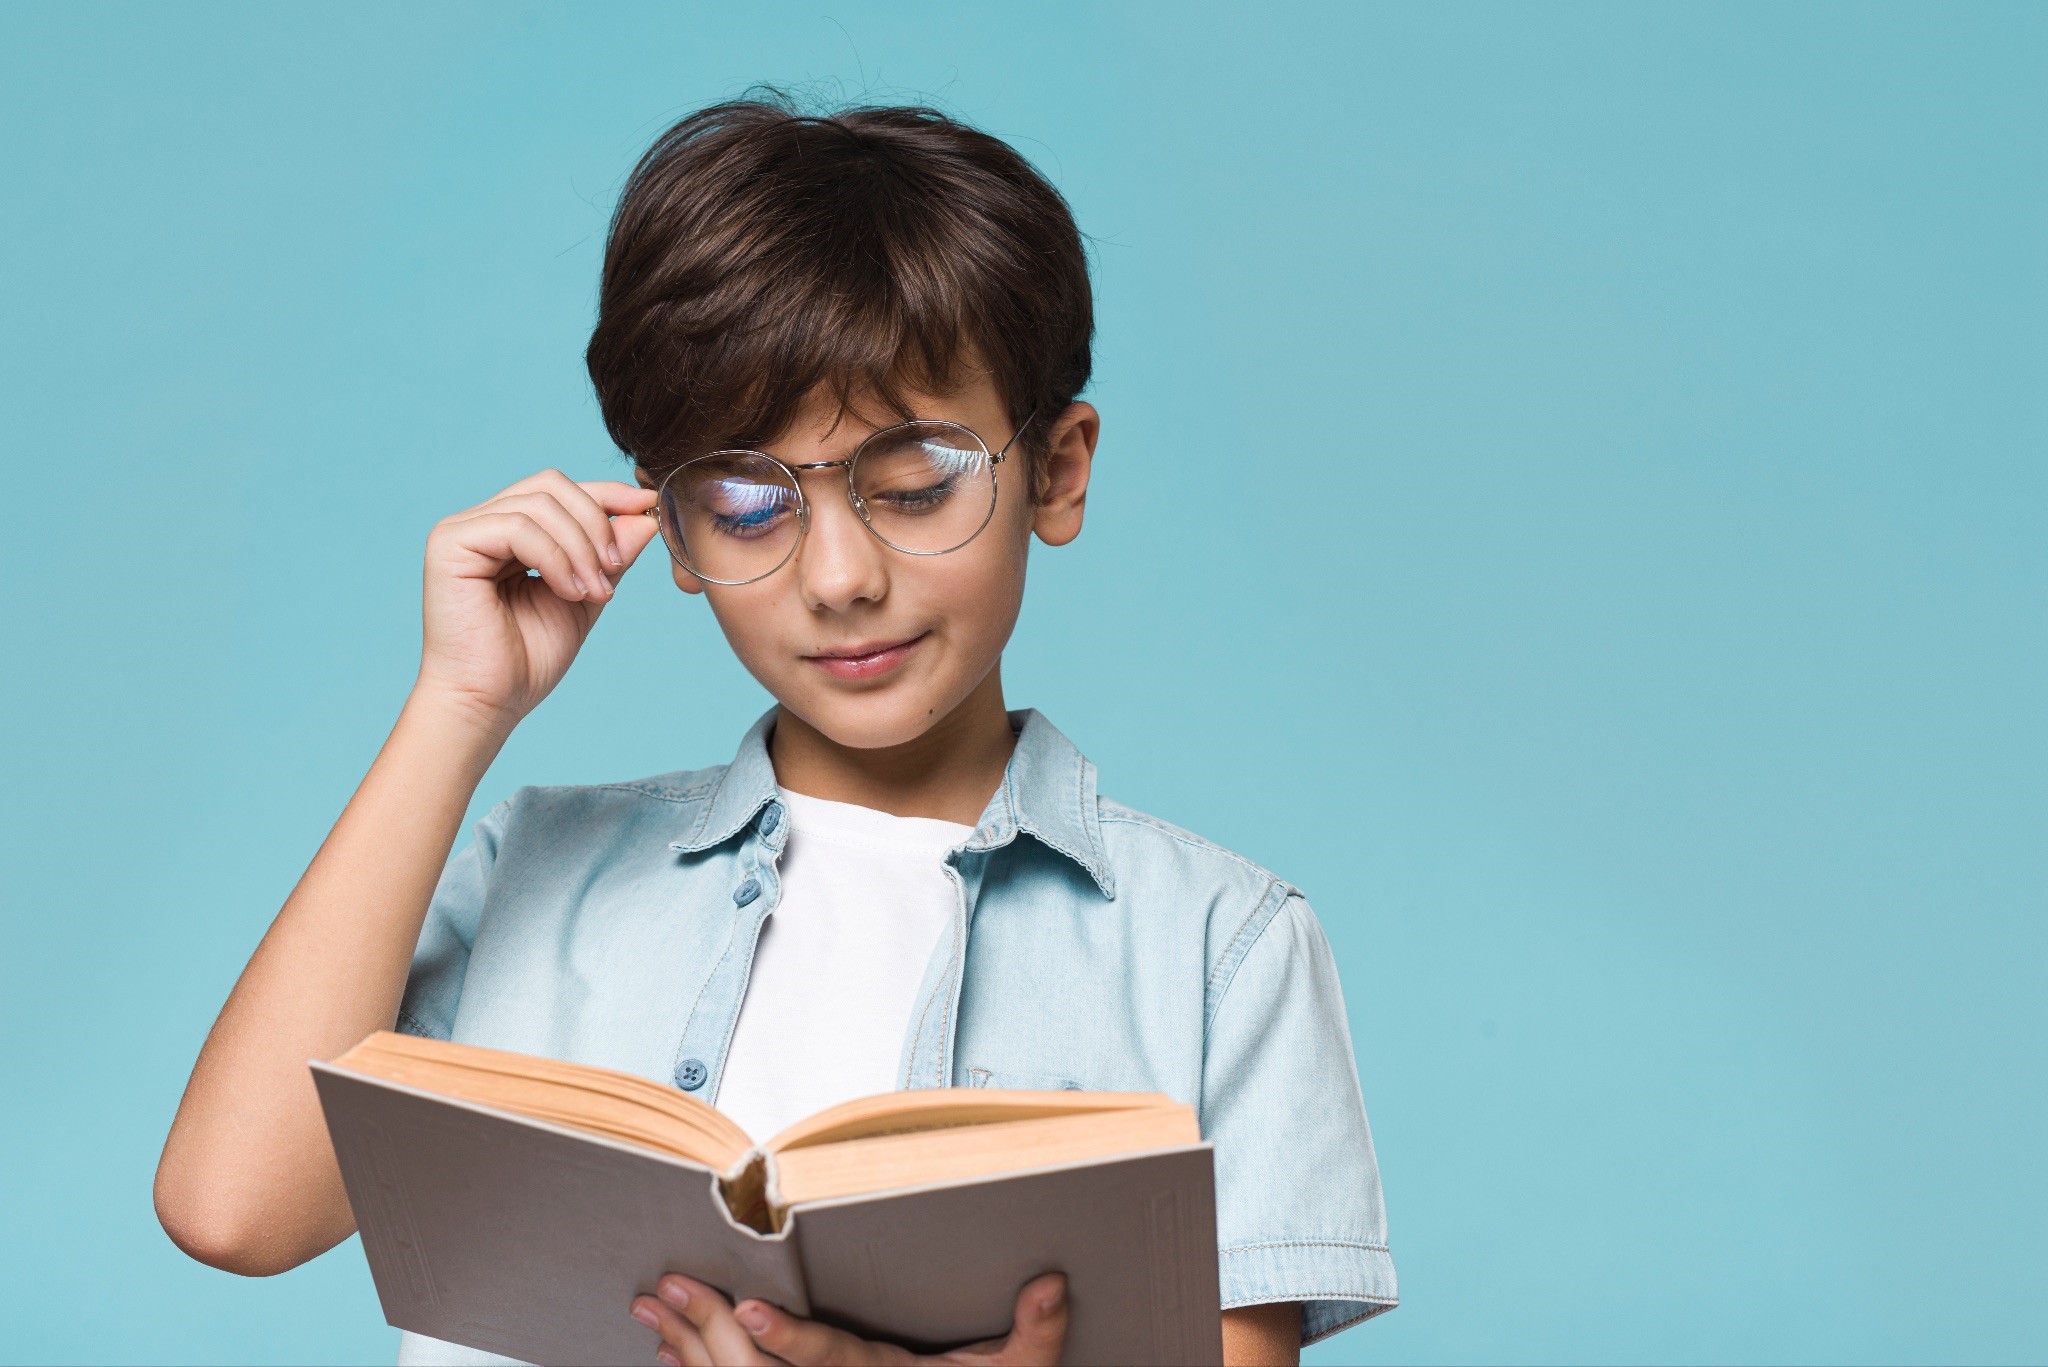 Children Eye care 
Boy with glasses